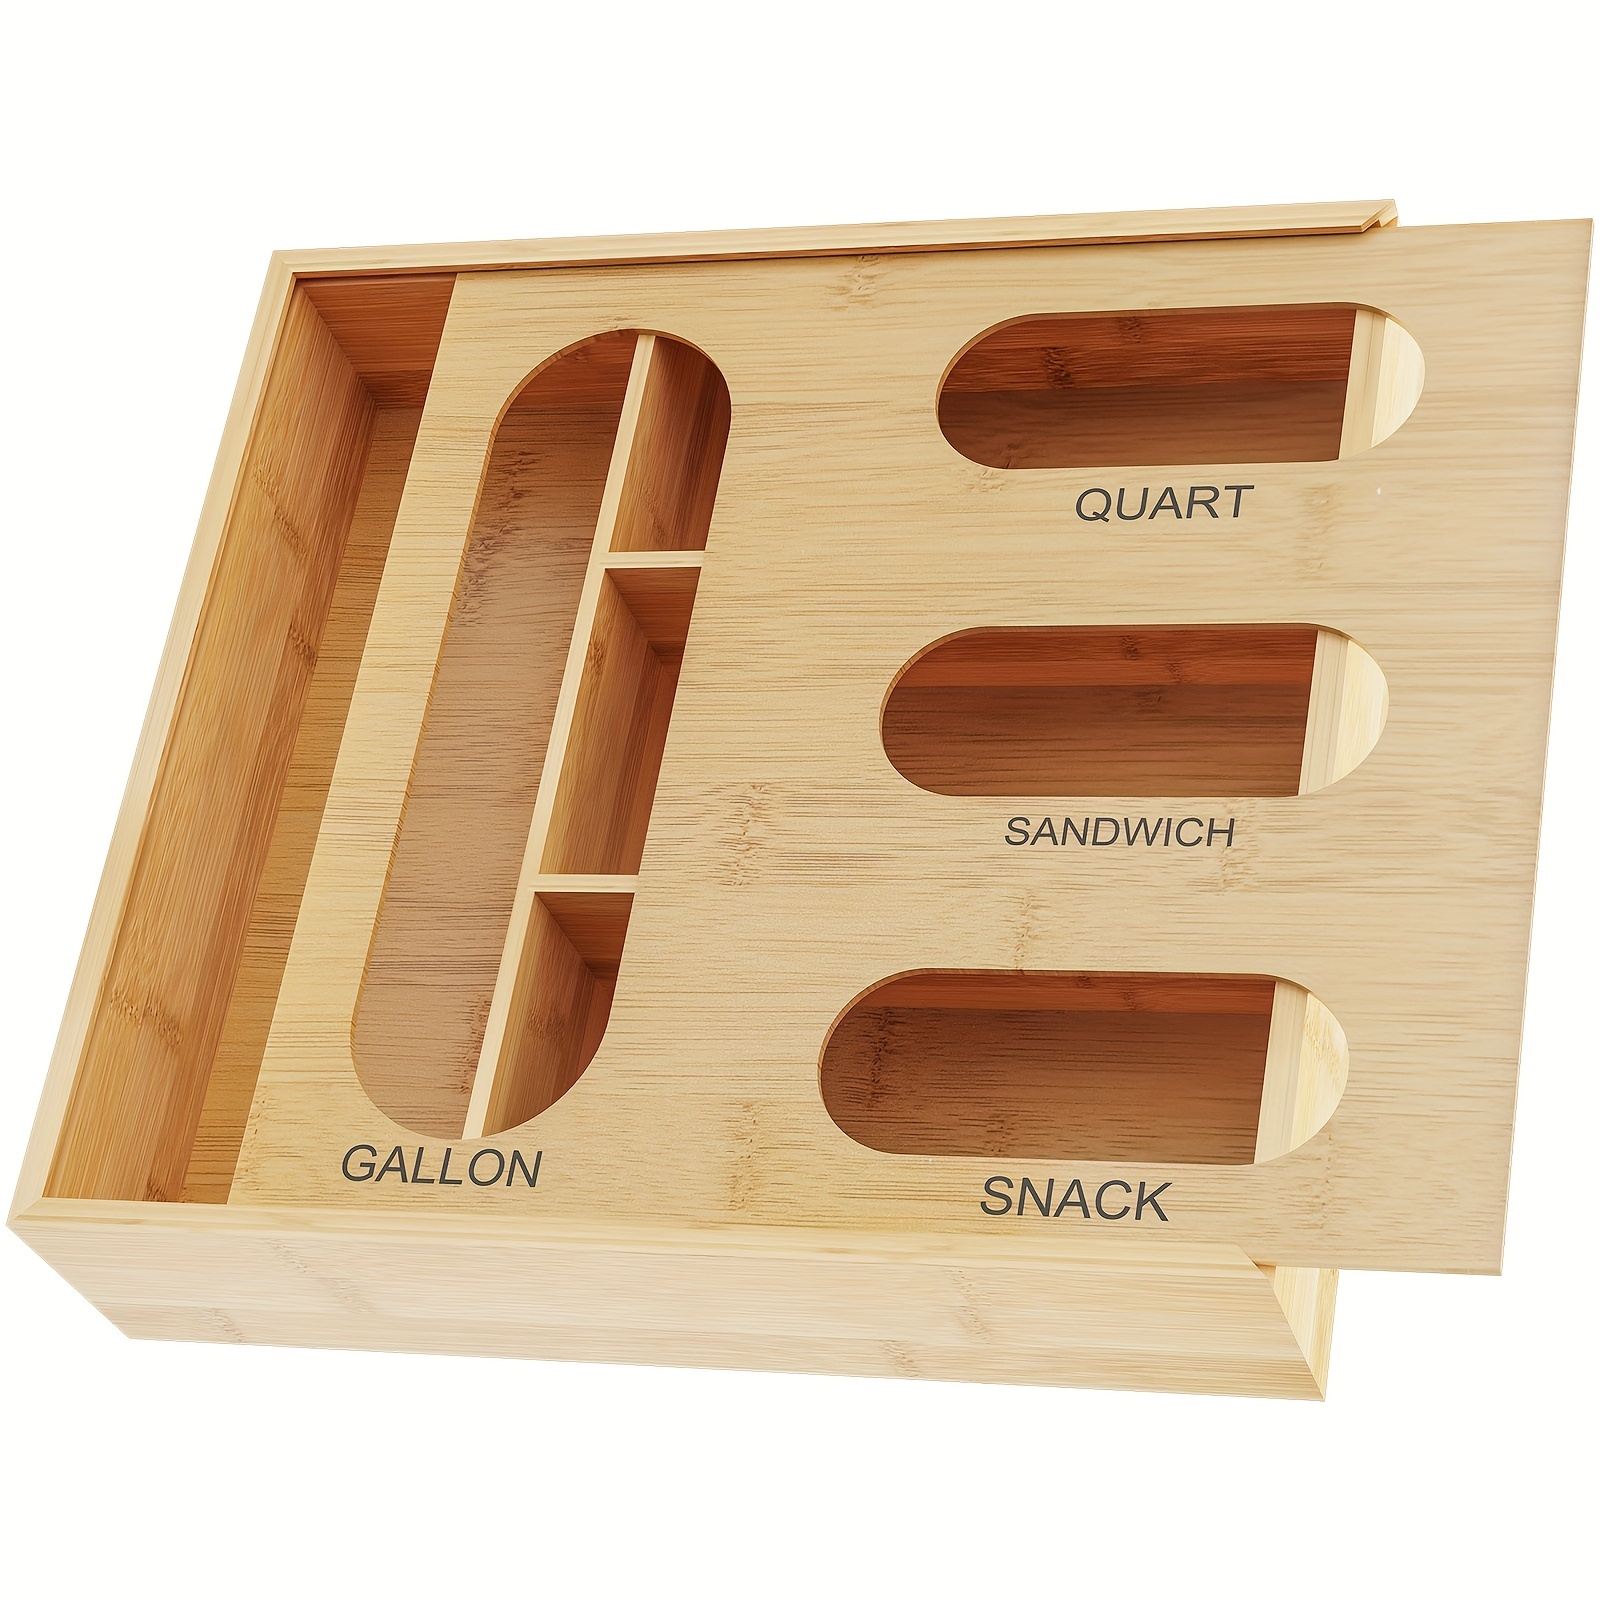 Bamboo Ziplock Bag Storage Organizer And Dispenser For Kitchen Drawer  Suitable For Gallon Sandwich & Snack Variety Size Bag - AliExpress